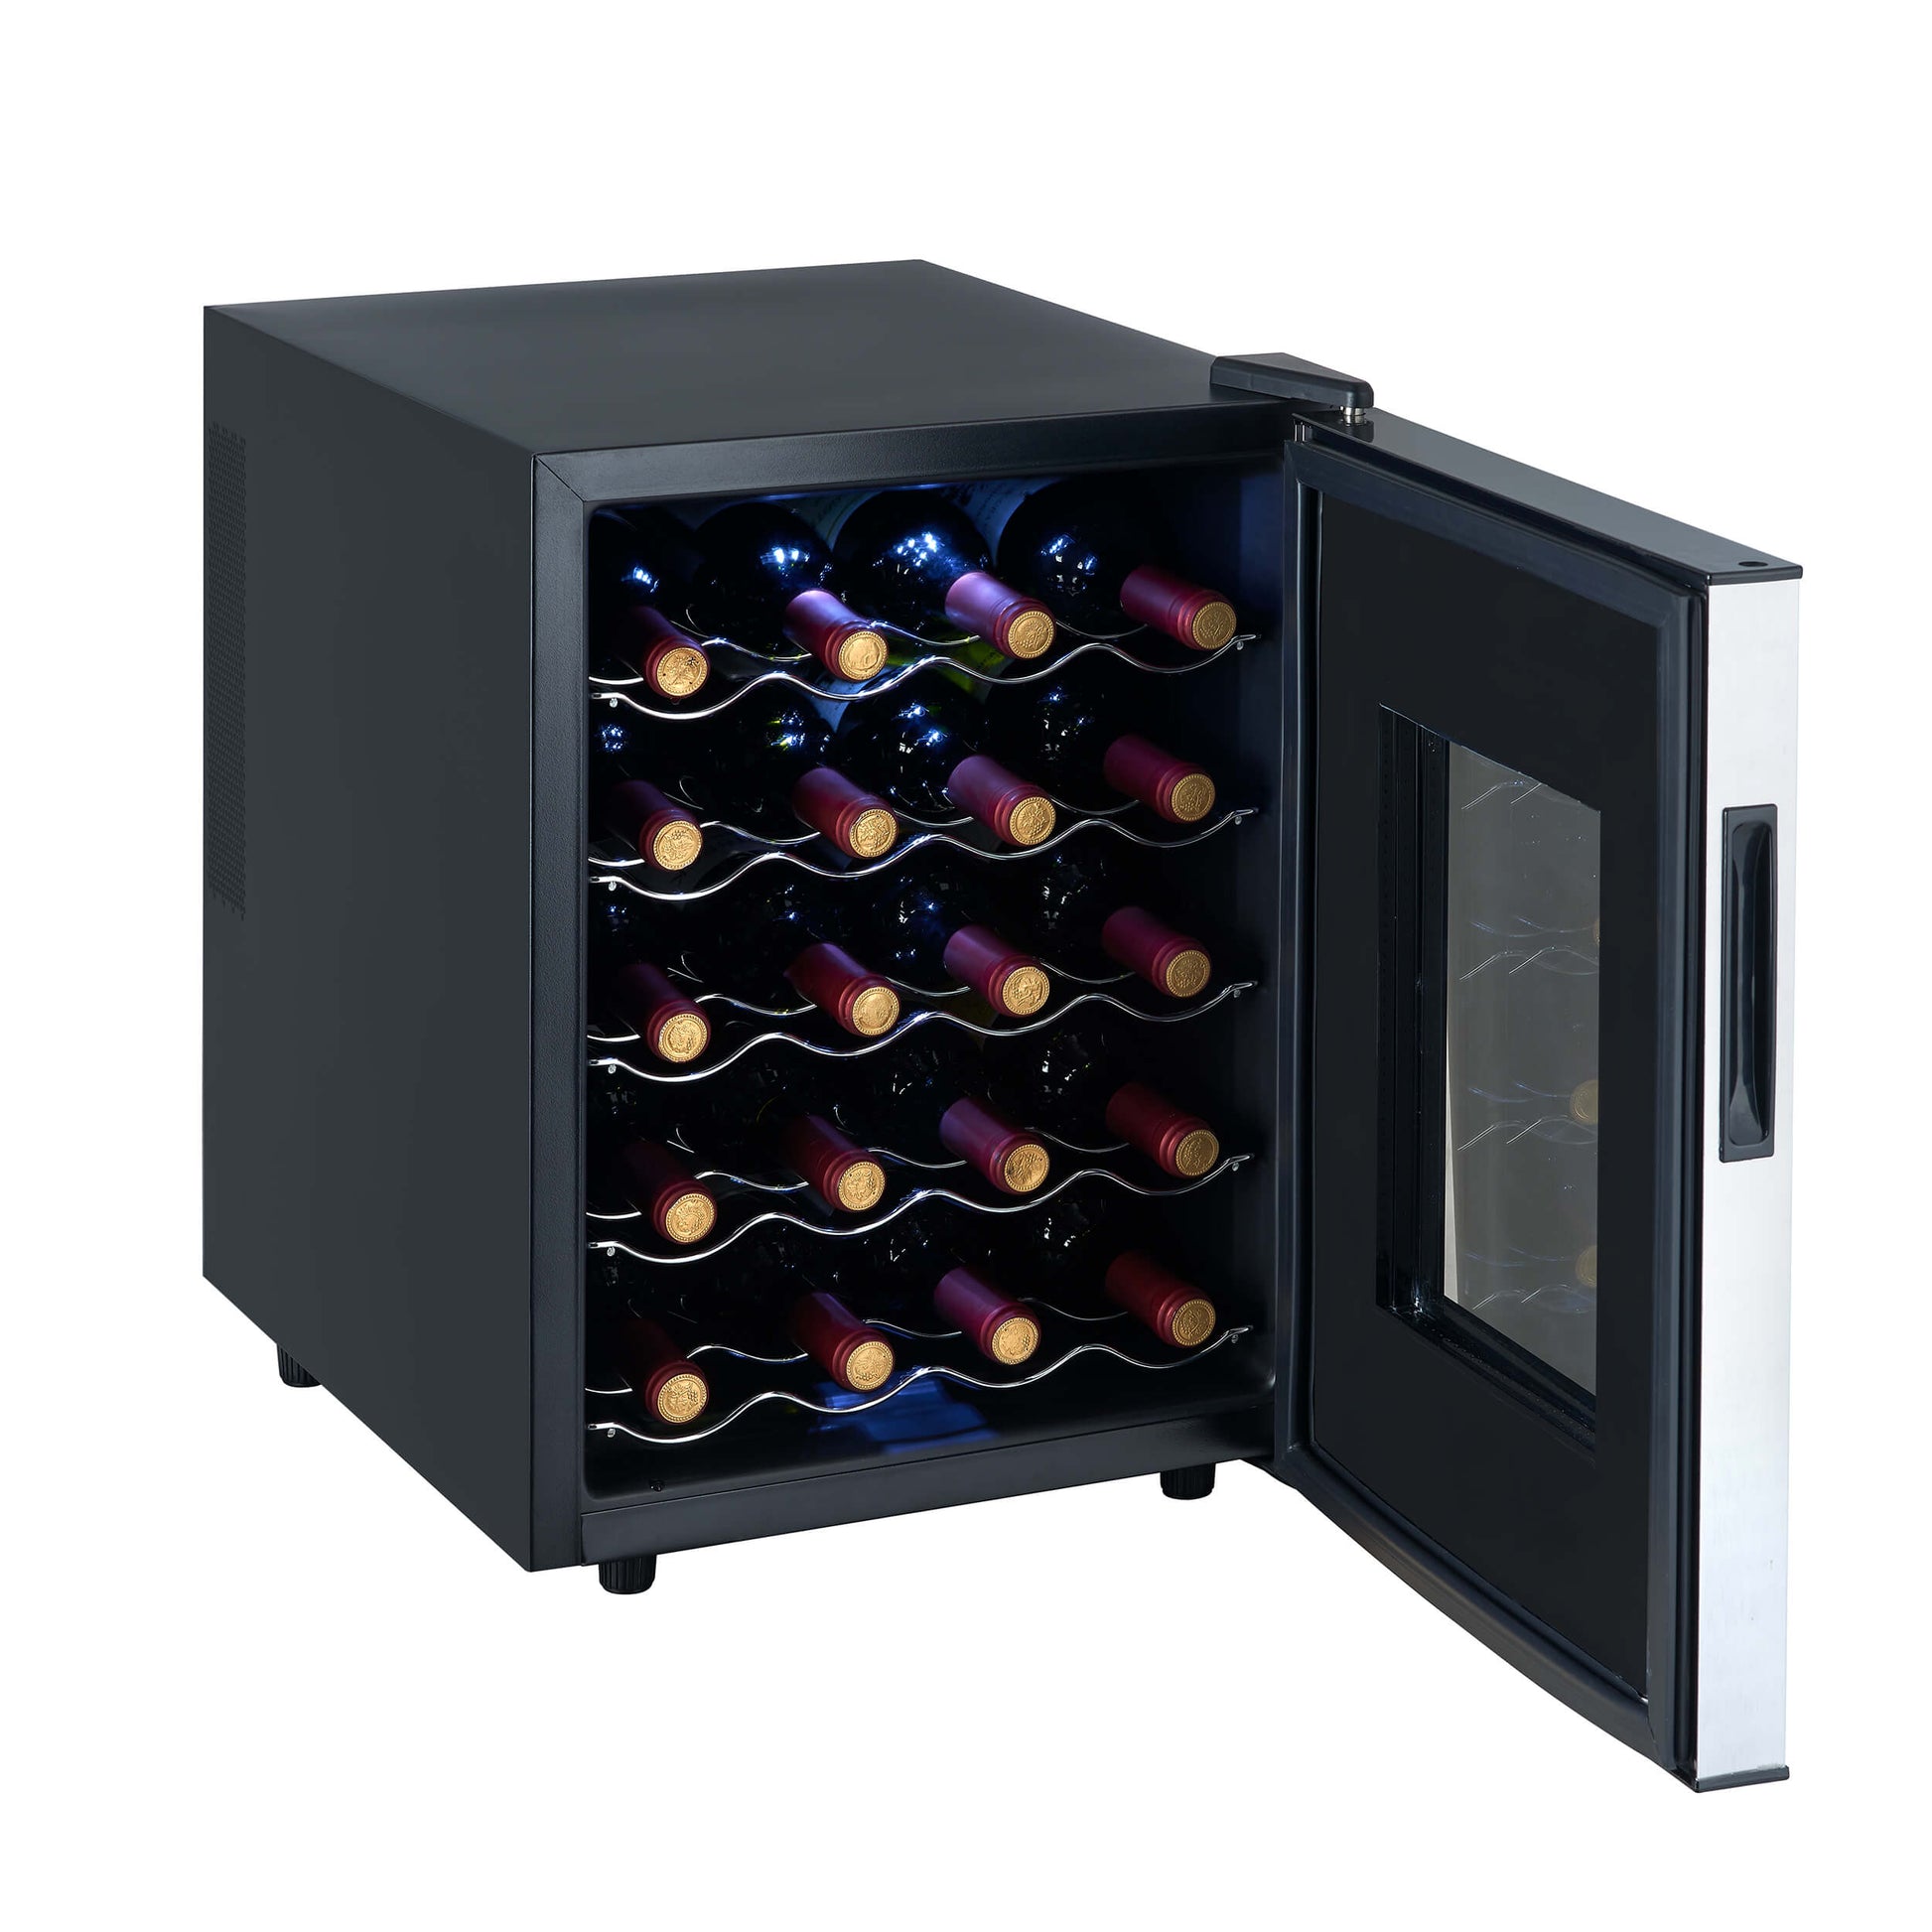 Whynter WC-201TD 20 Bottle Freestanding Thermoelectric Wine Cooler with Mirror Glass Door